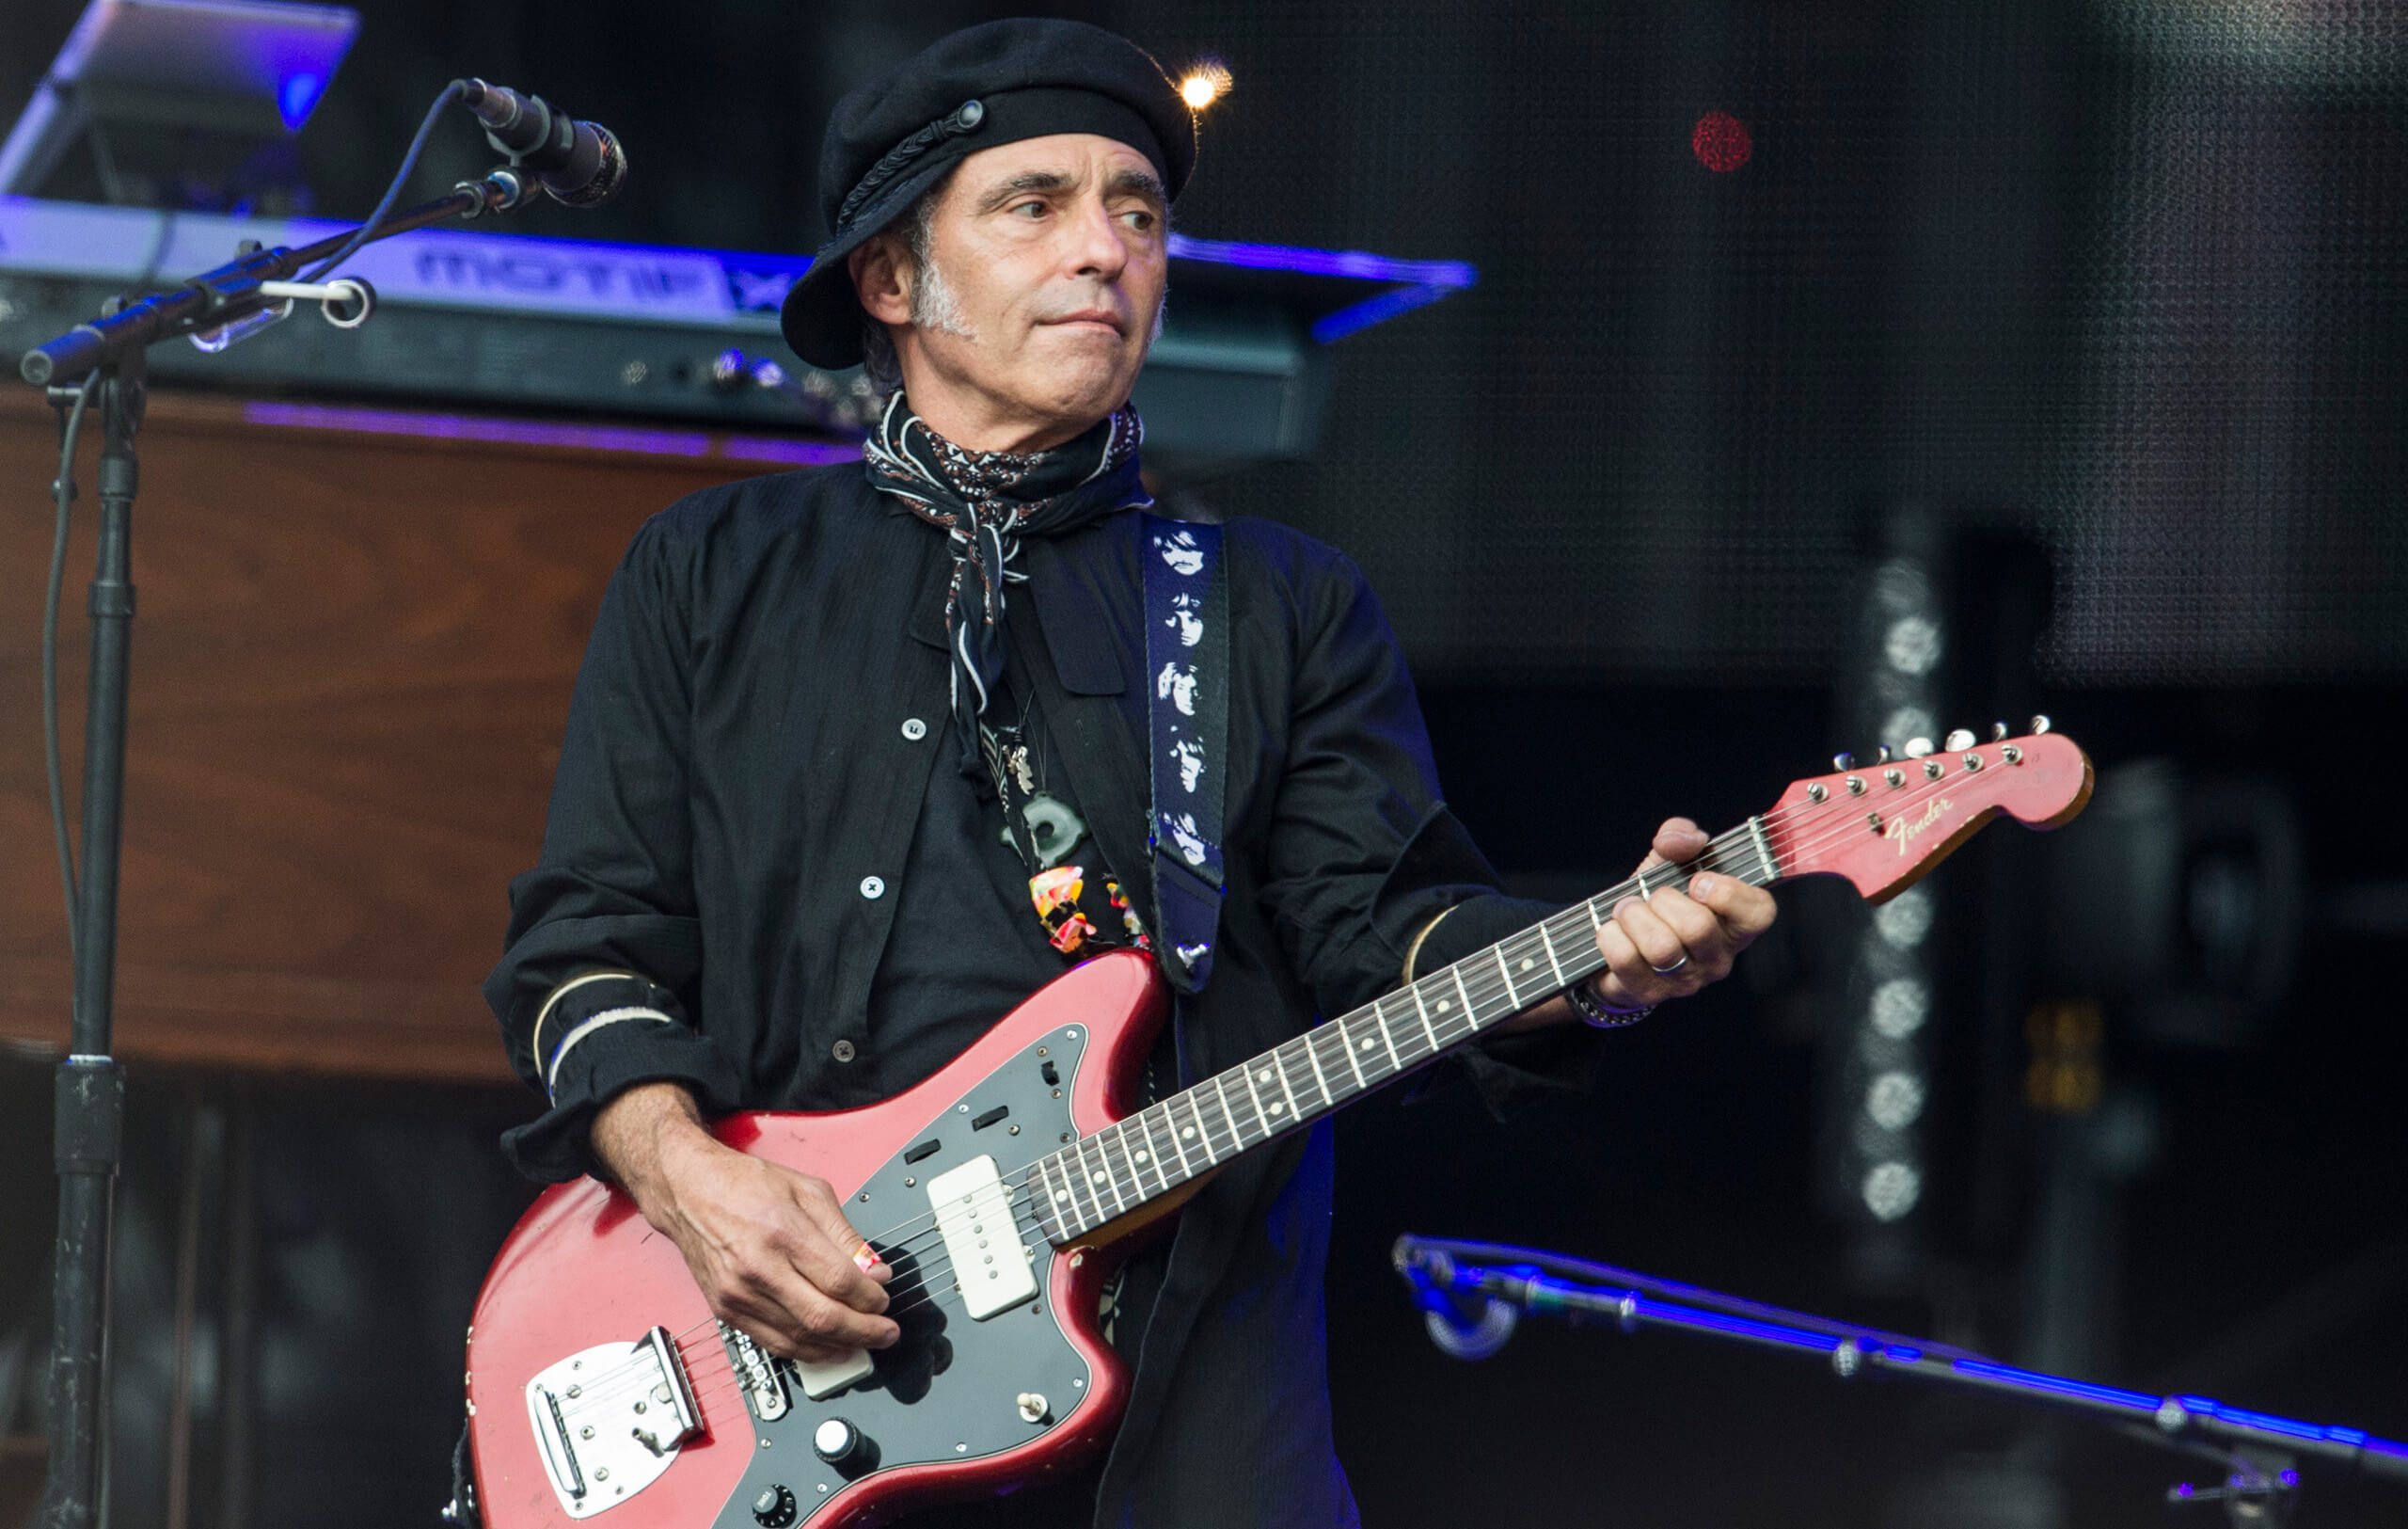 Nils Lofgren performs with Bruce Springsteen at Ricoh Arena on June 3, 2016 in Coventry, England.